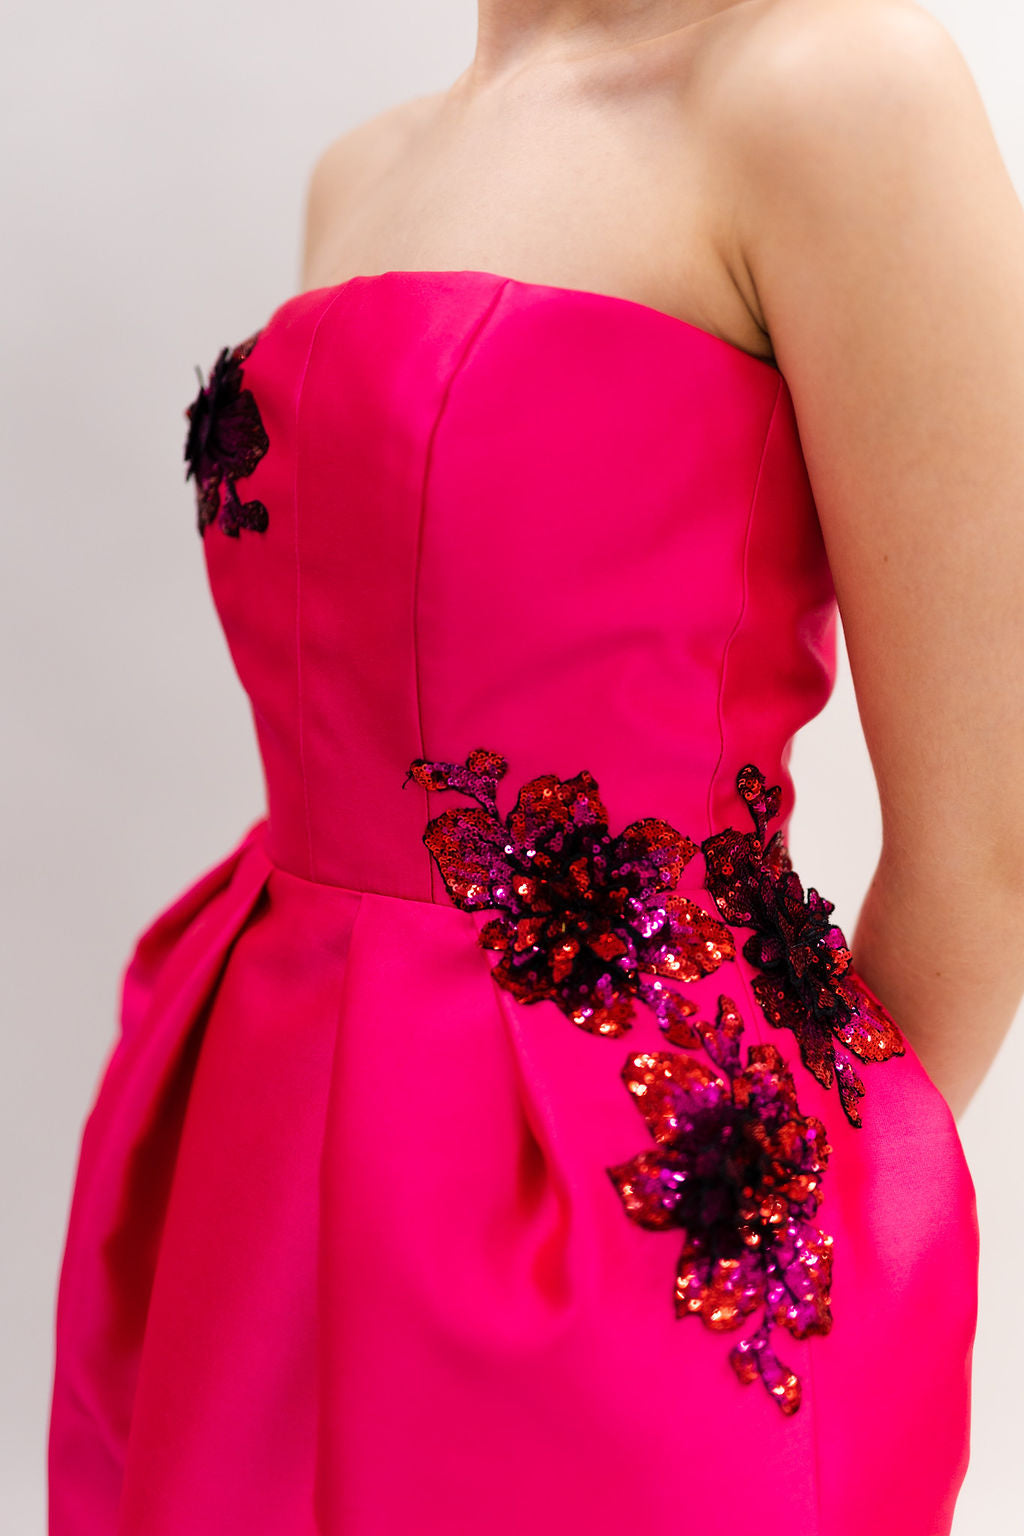 HOT PINK PUFFY SKIRT WITH EMBROIDERY DETAILS